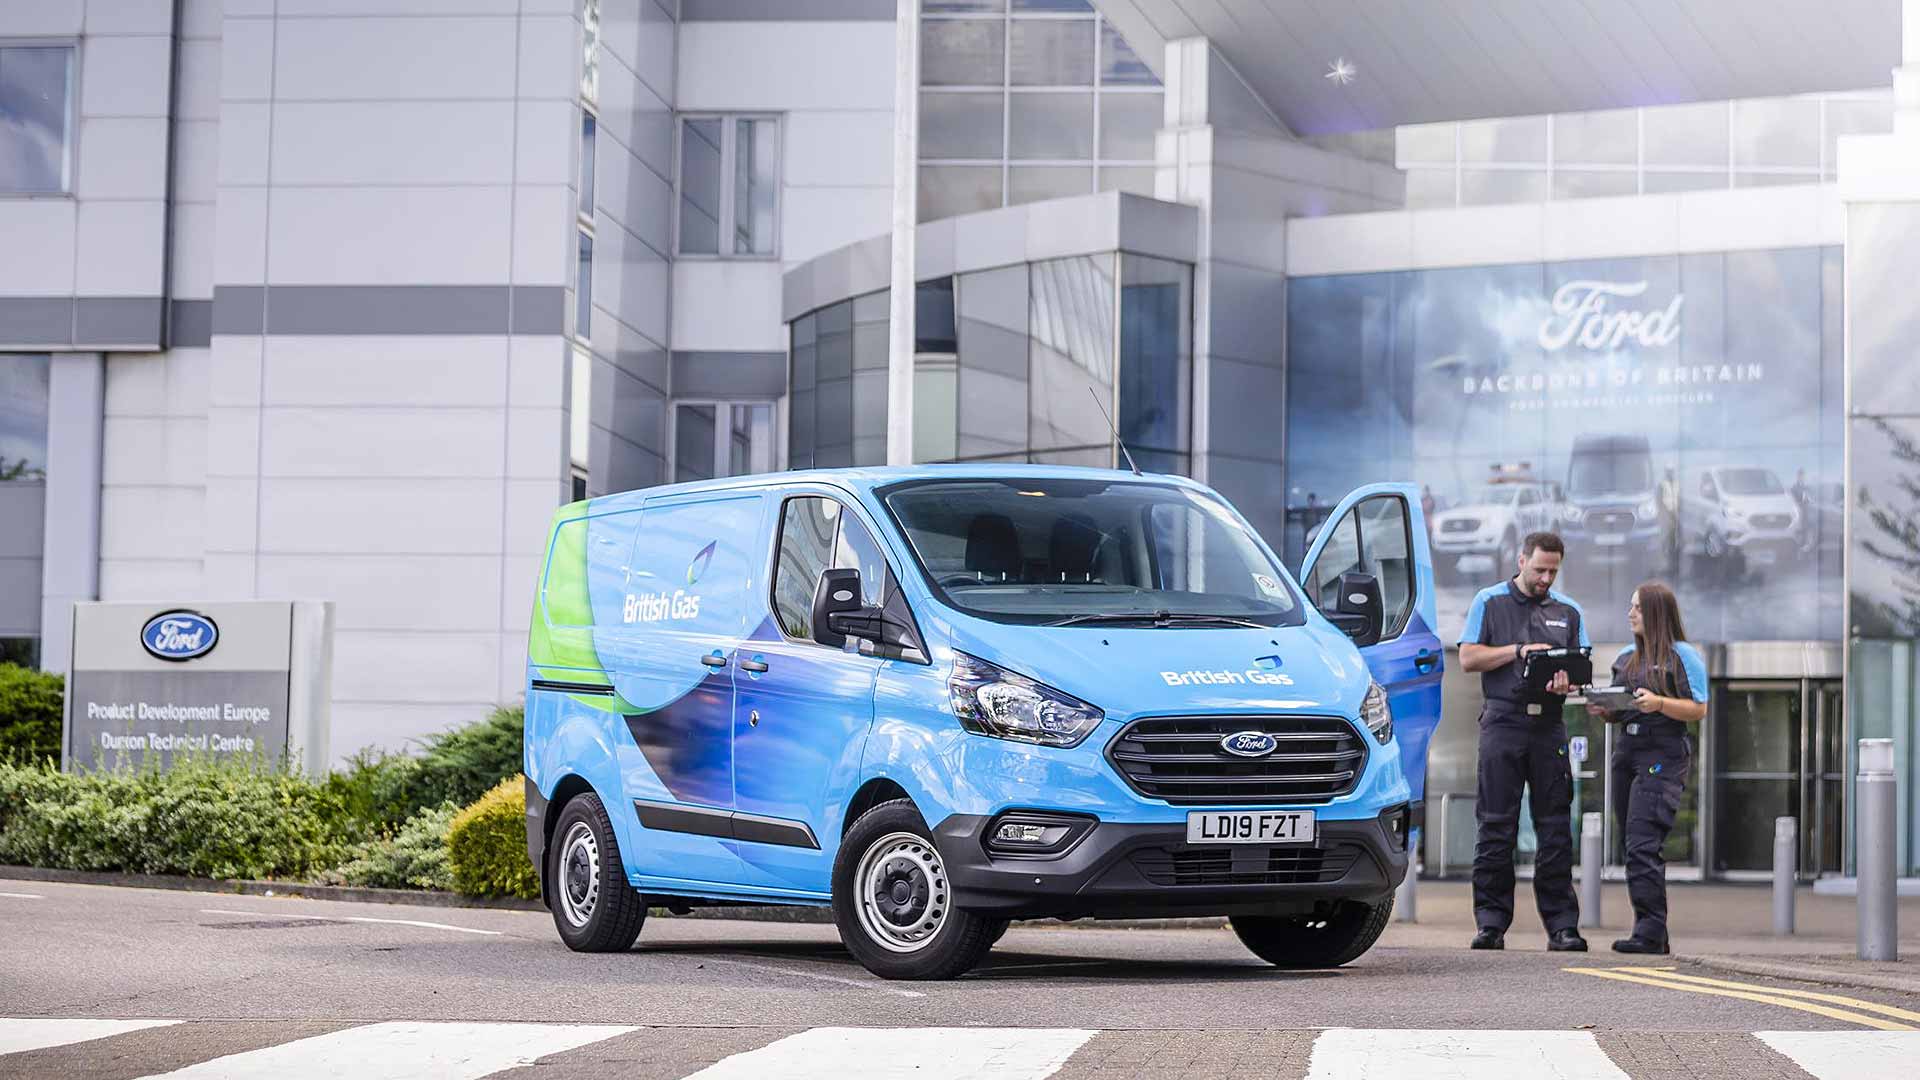 Ford and British Gas announce electric car charging partnership